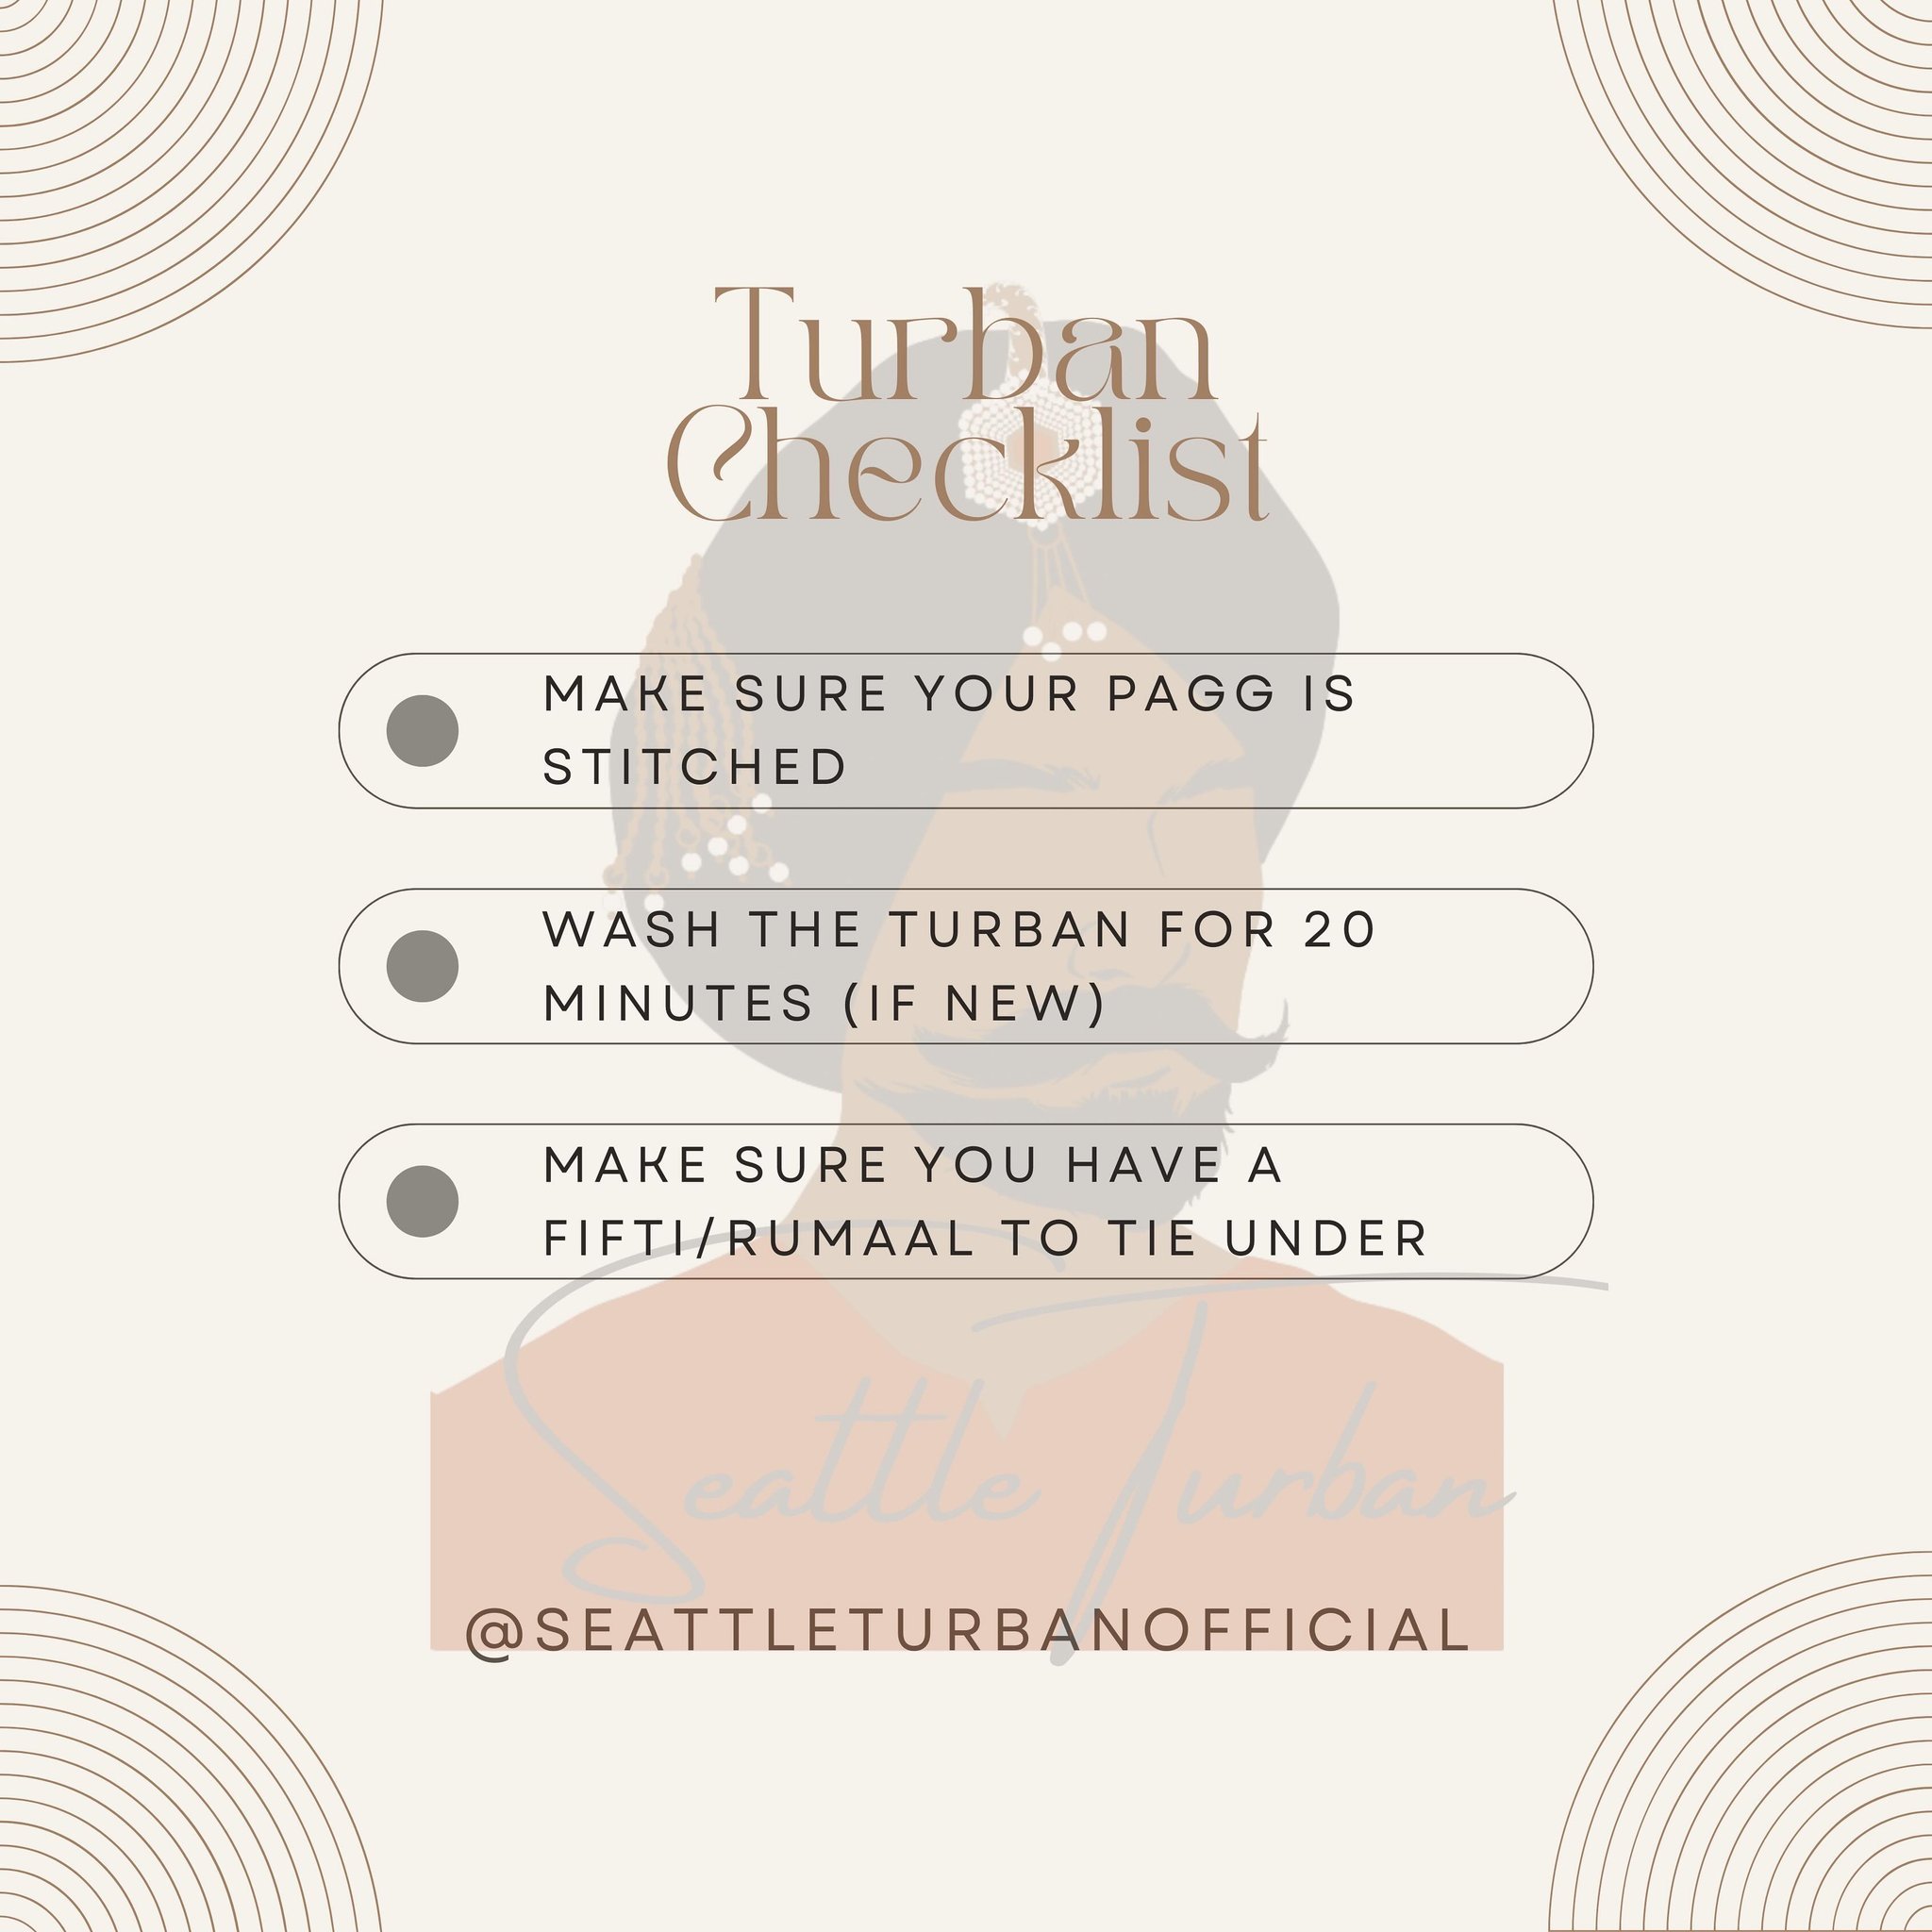 Here is a Turban Checklist ✅ for everyone who wants their Pagg tied for the first time. Make sure you check all the boxes before your big day. Please let us know if you have further questions!